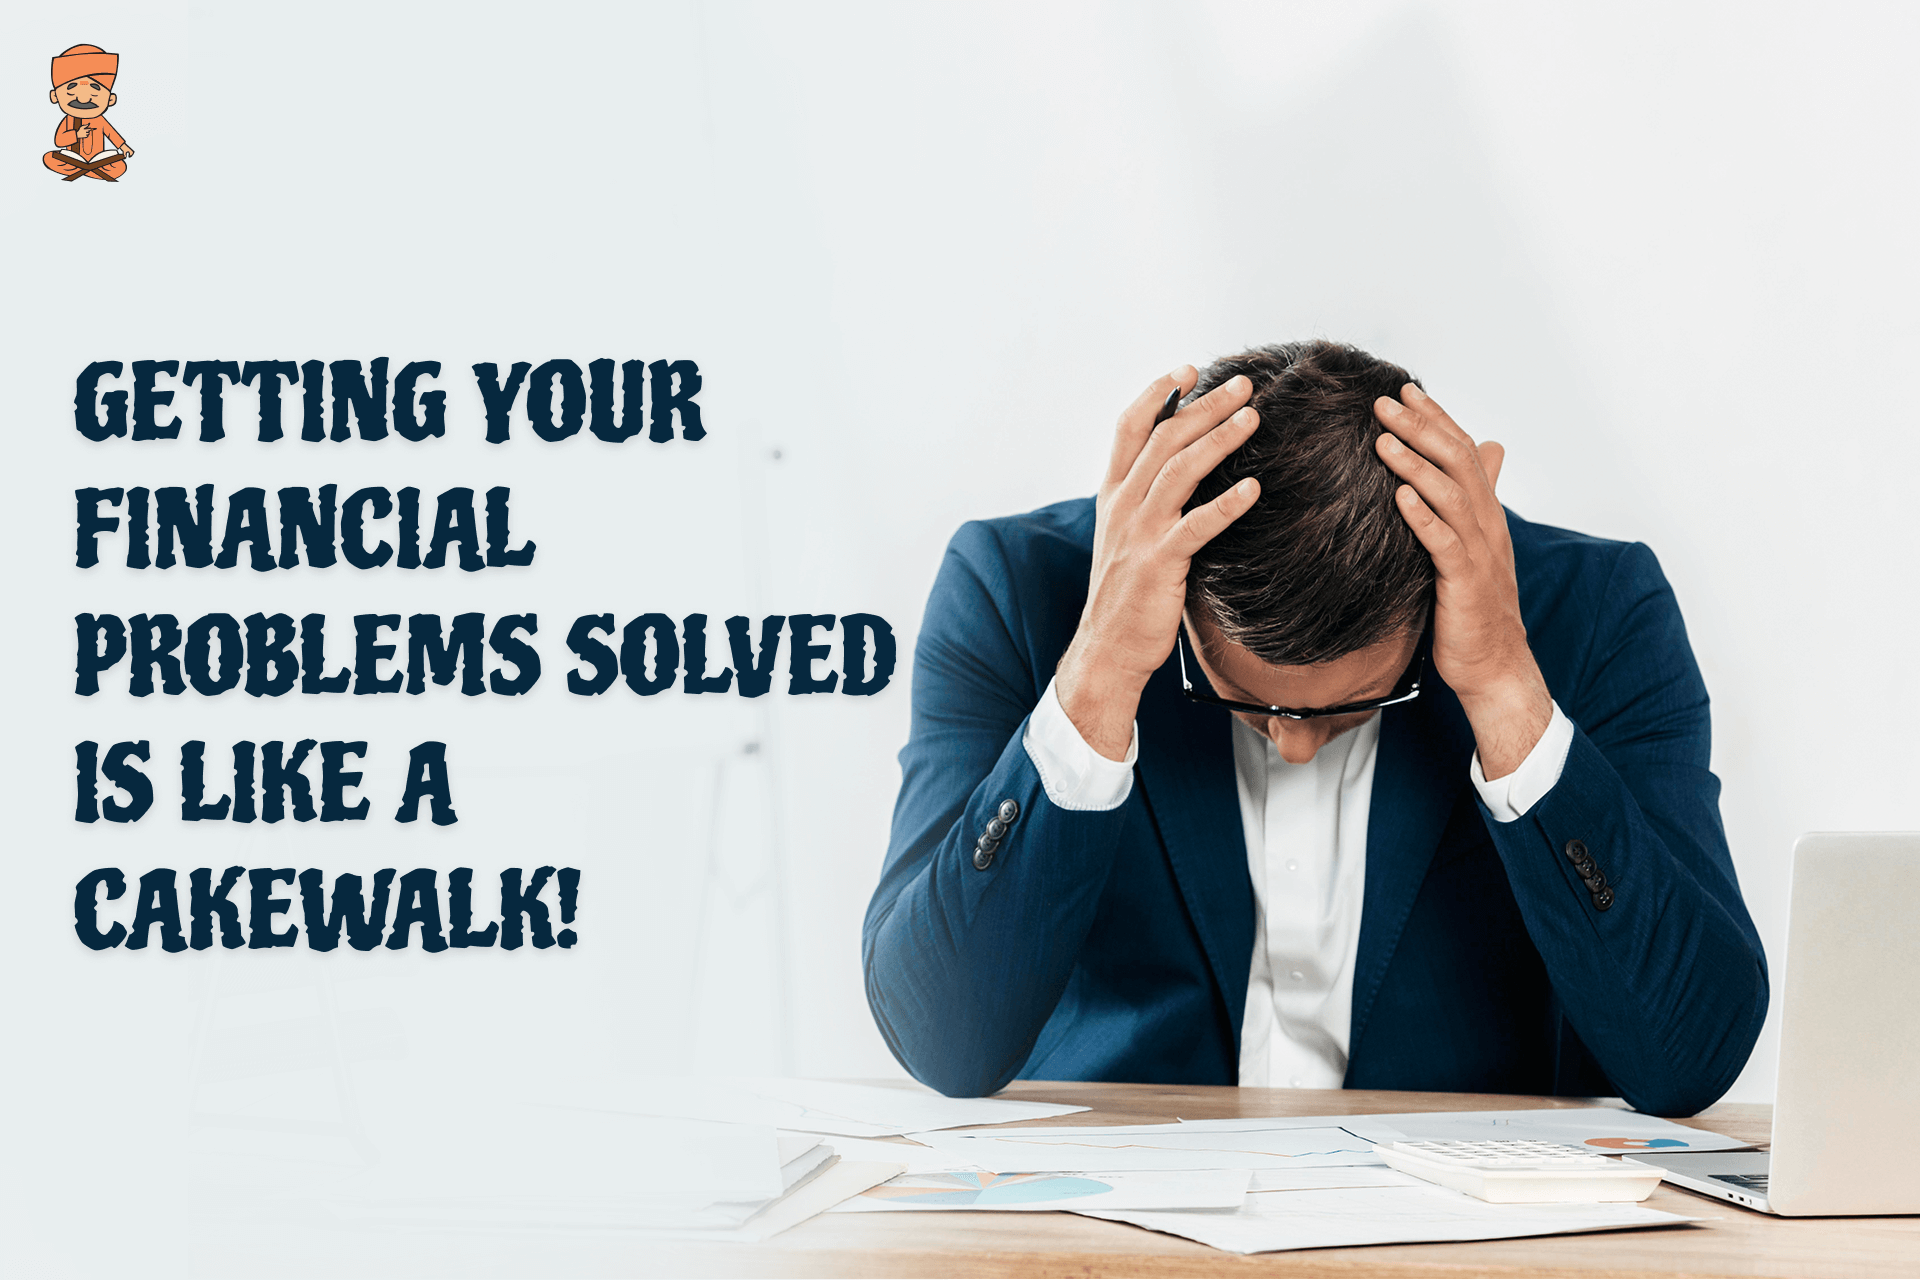 Getting your financial problems solved is like a cakewalk!